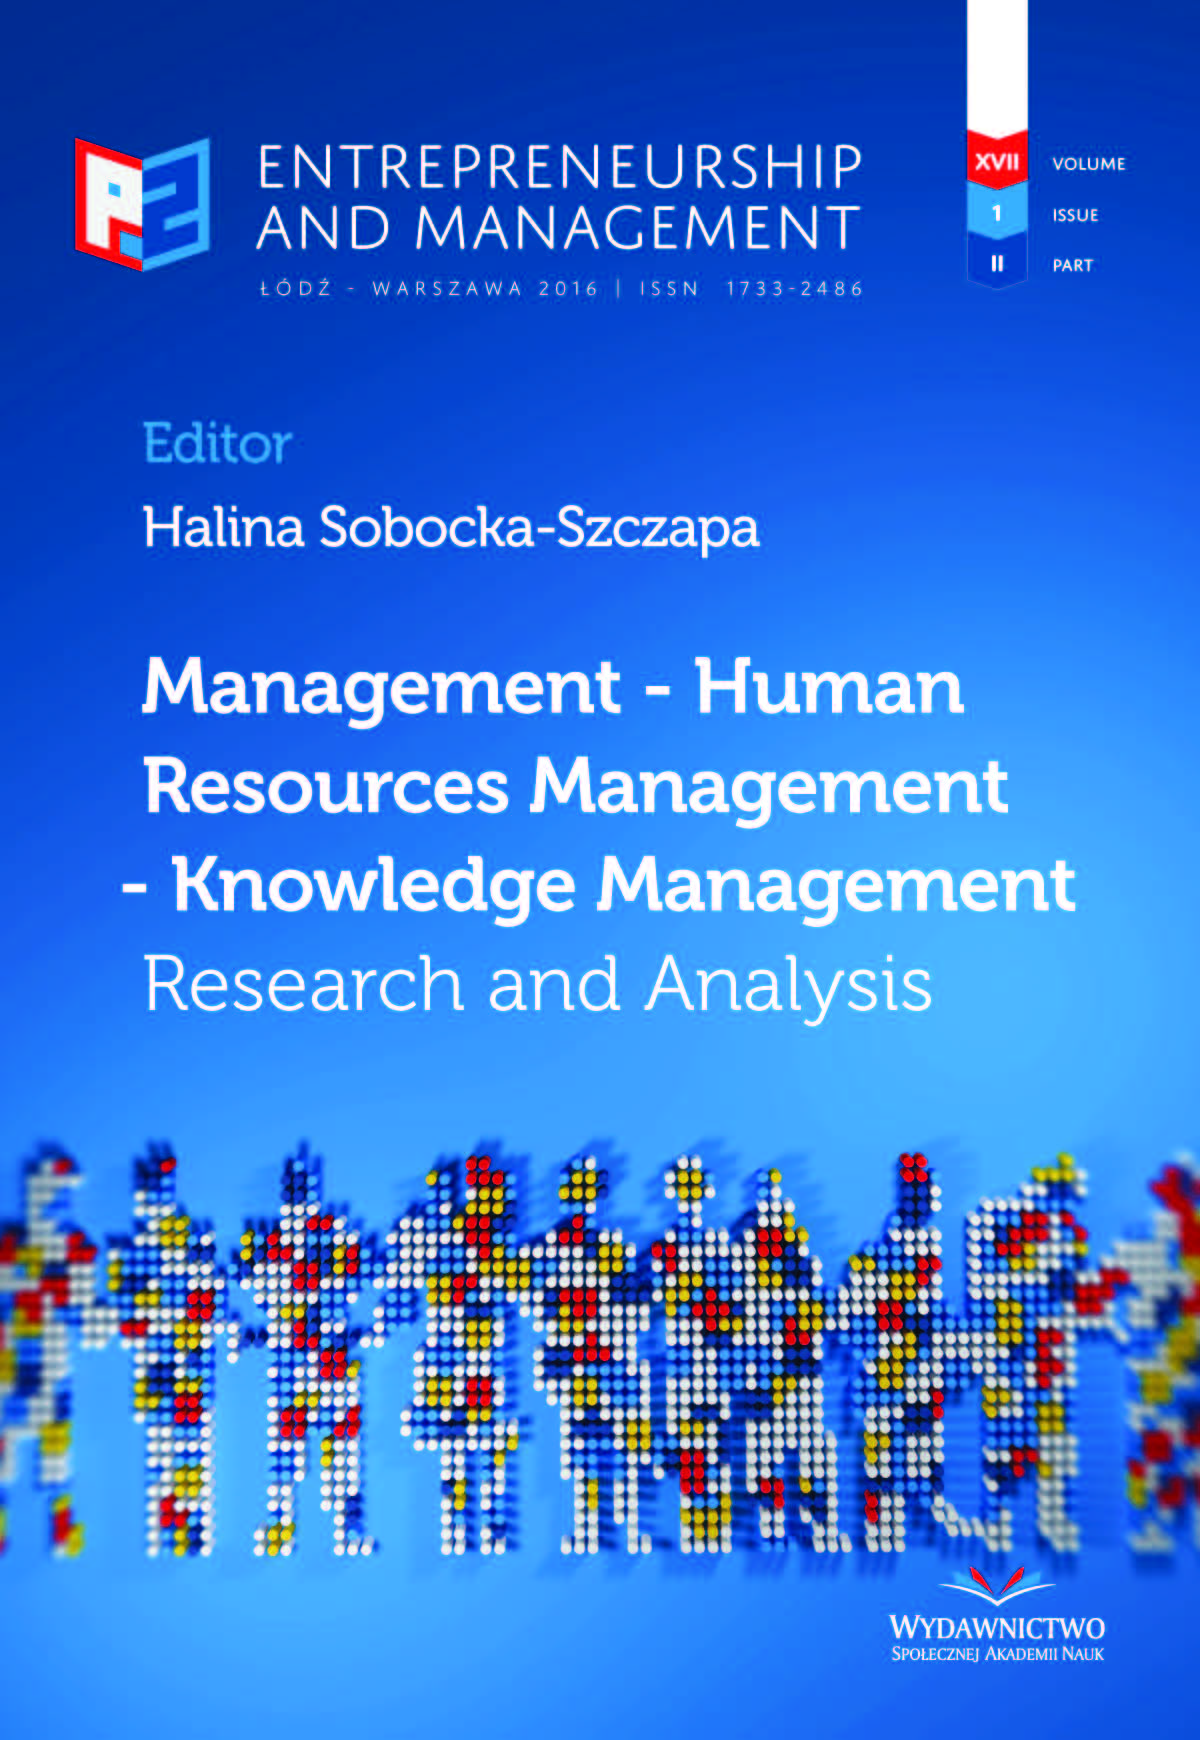 Knowledge Management System and Management
Styles Cover Image